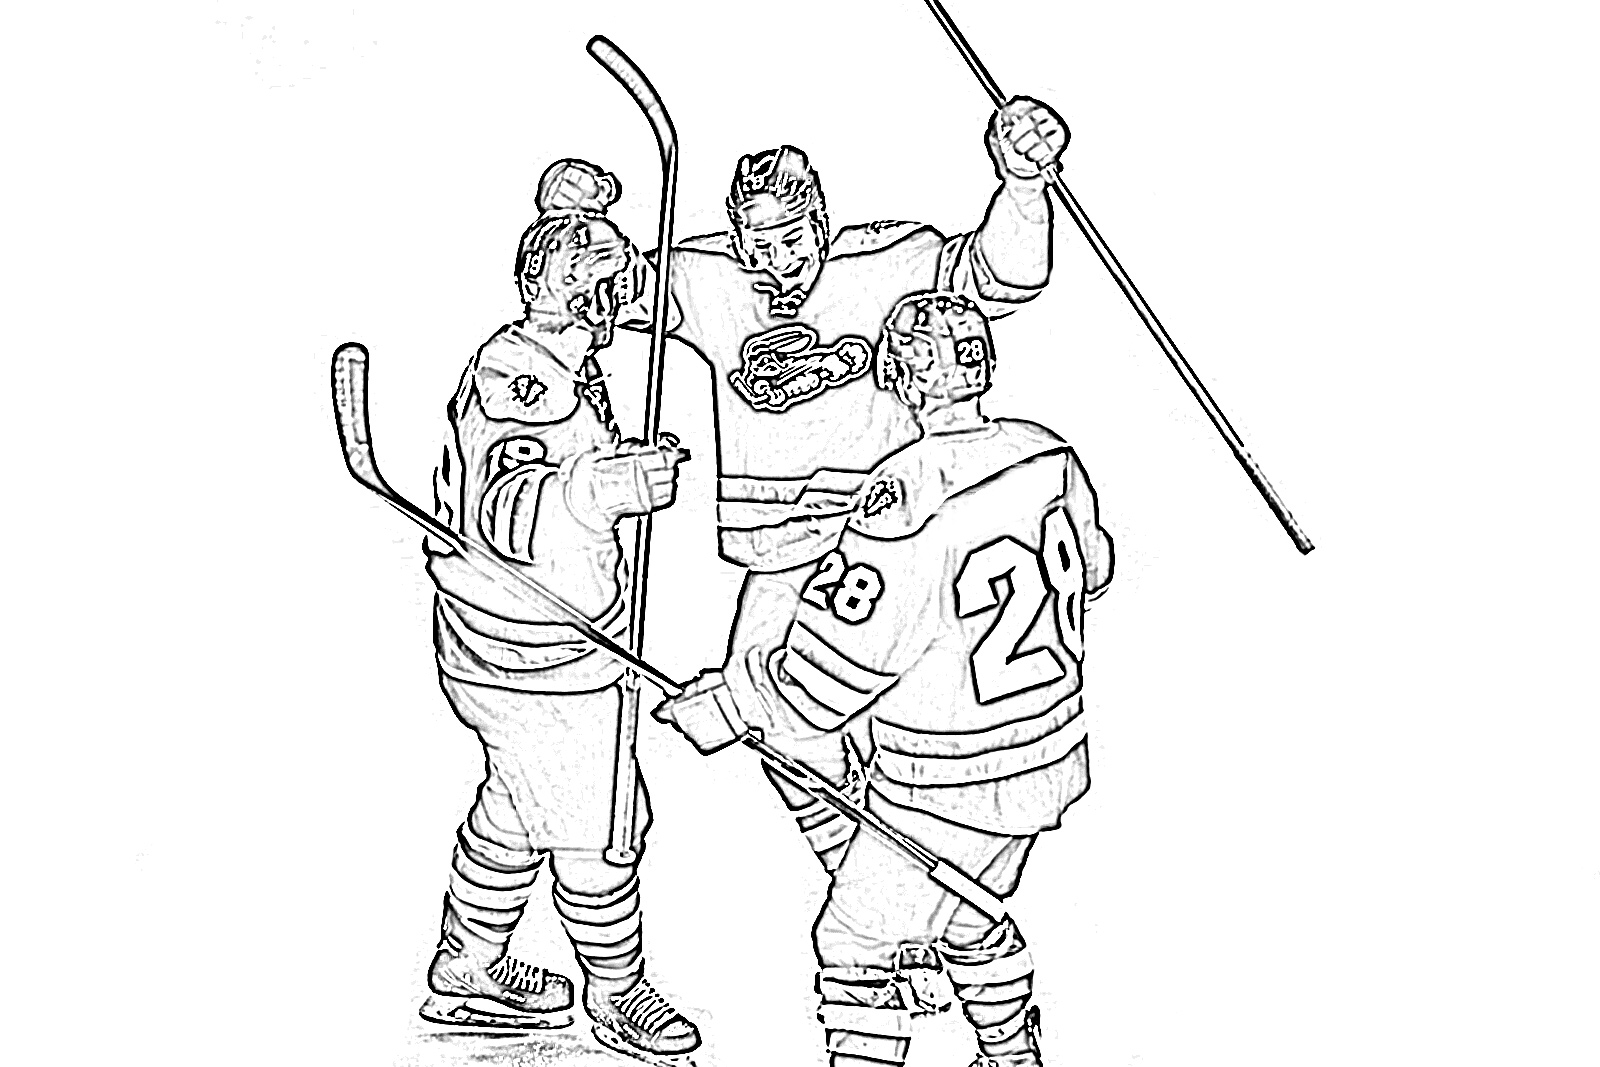 Hockey players celebrating coloring page